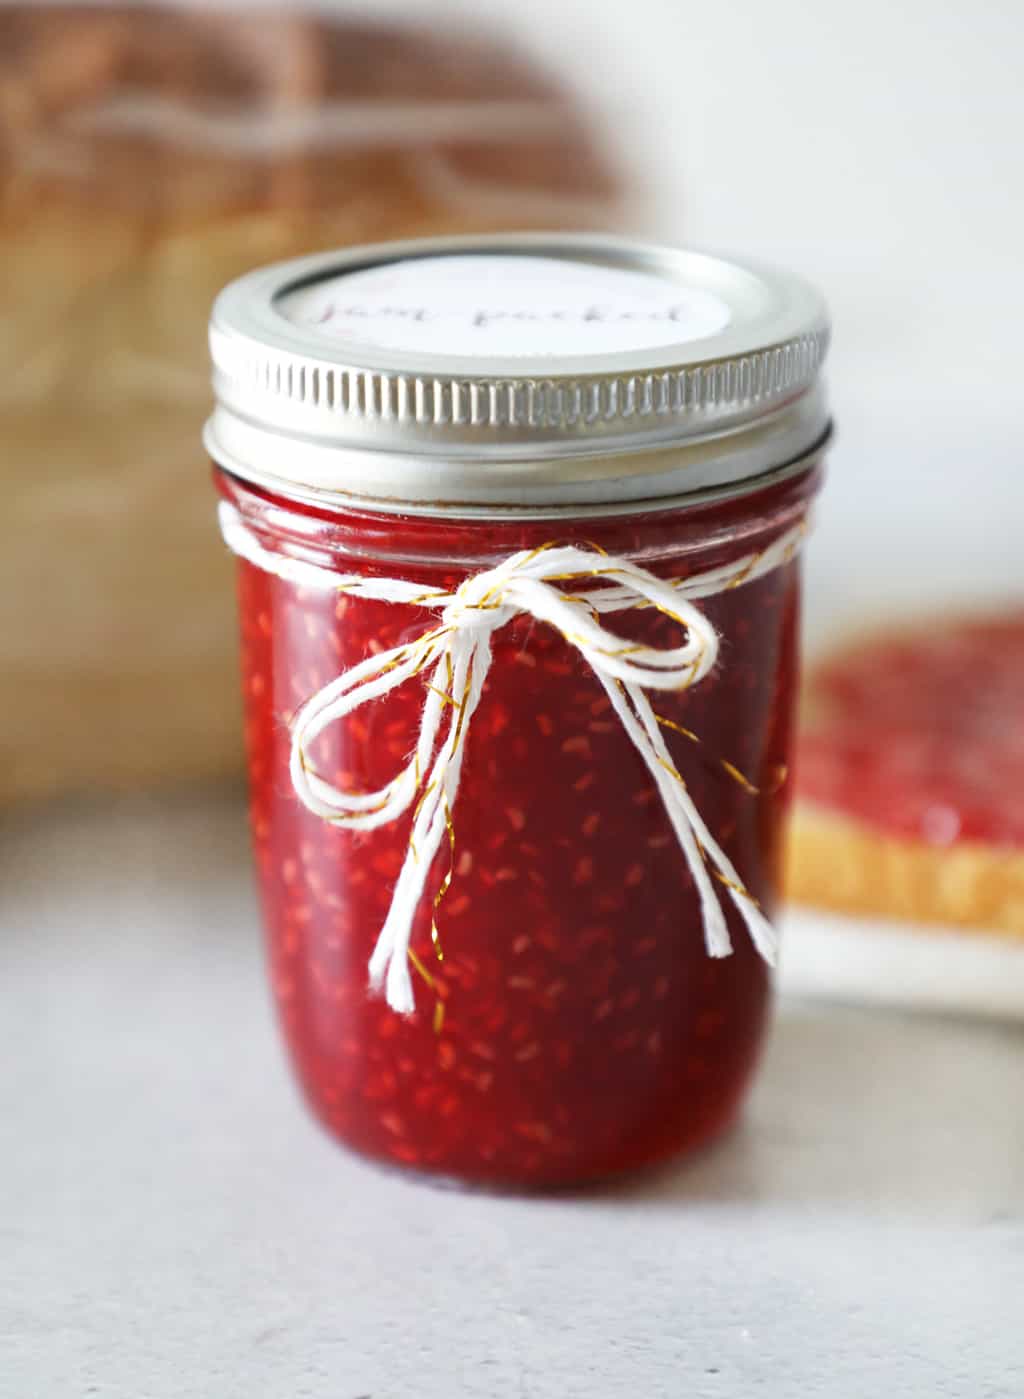 jam tied with a bow in front of bread and toast